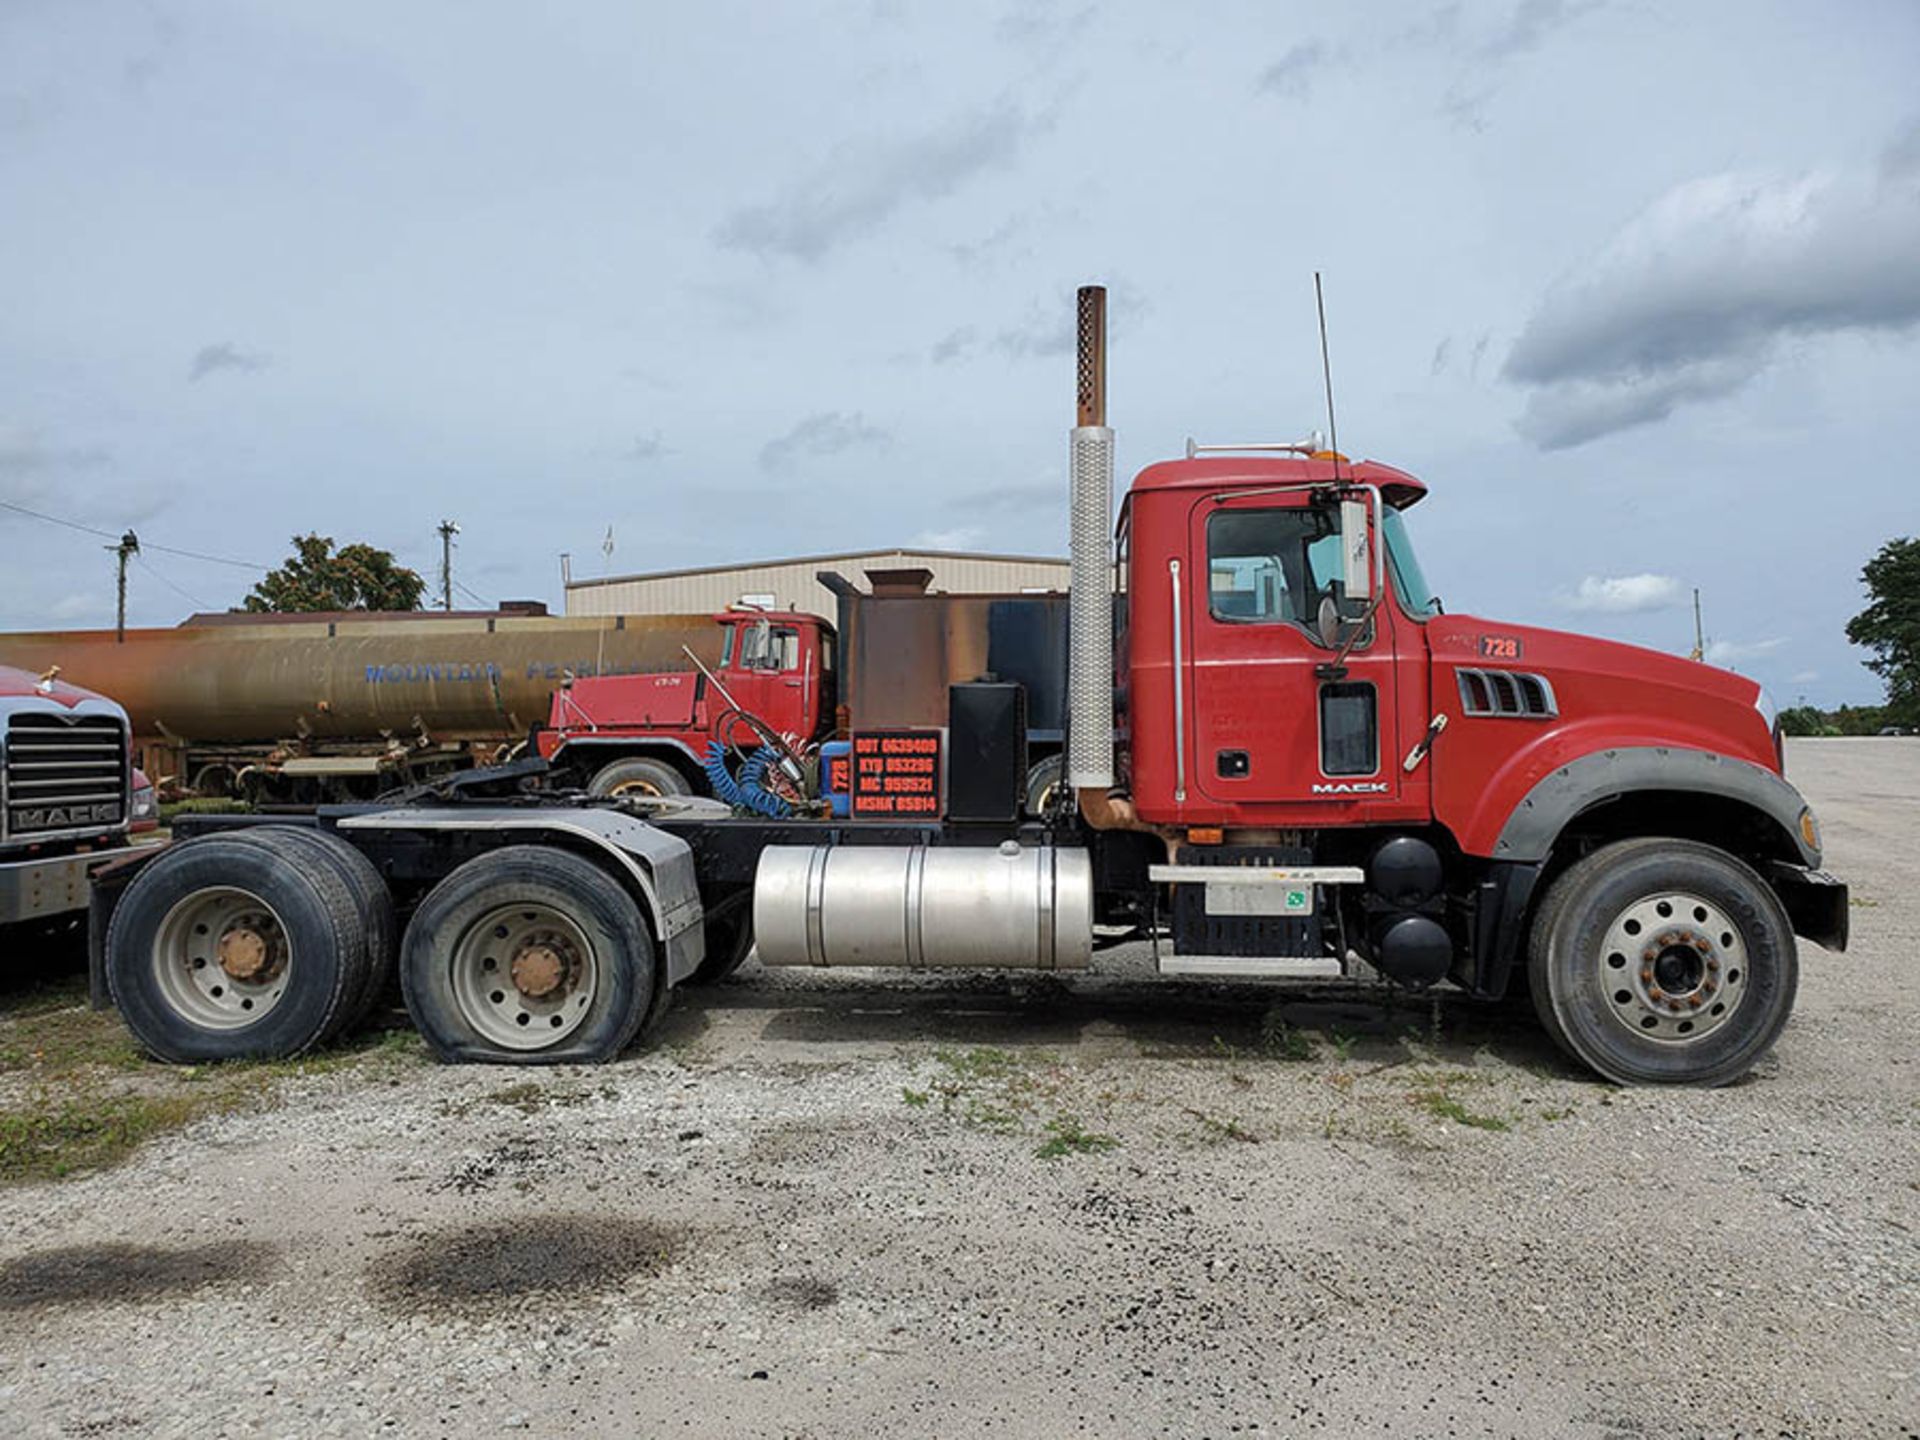 2009 MACK GU713 T/A DAY CAB TRACTOR, MAXITORQUE 18 SPEED TRANS., WET LINES MACK INLINE SIX DIESEL - Image 5 of 10